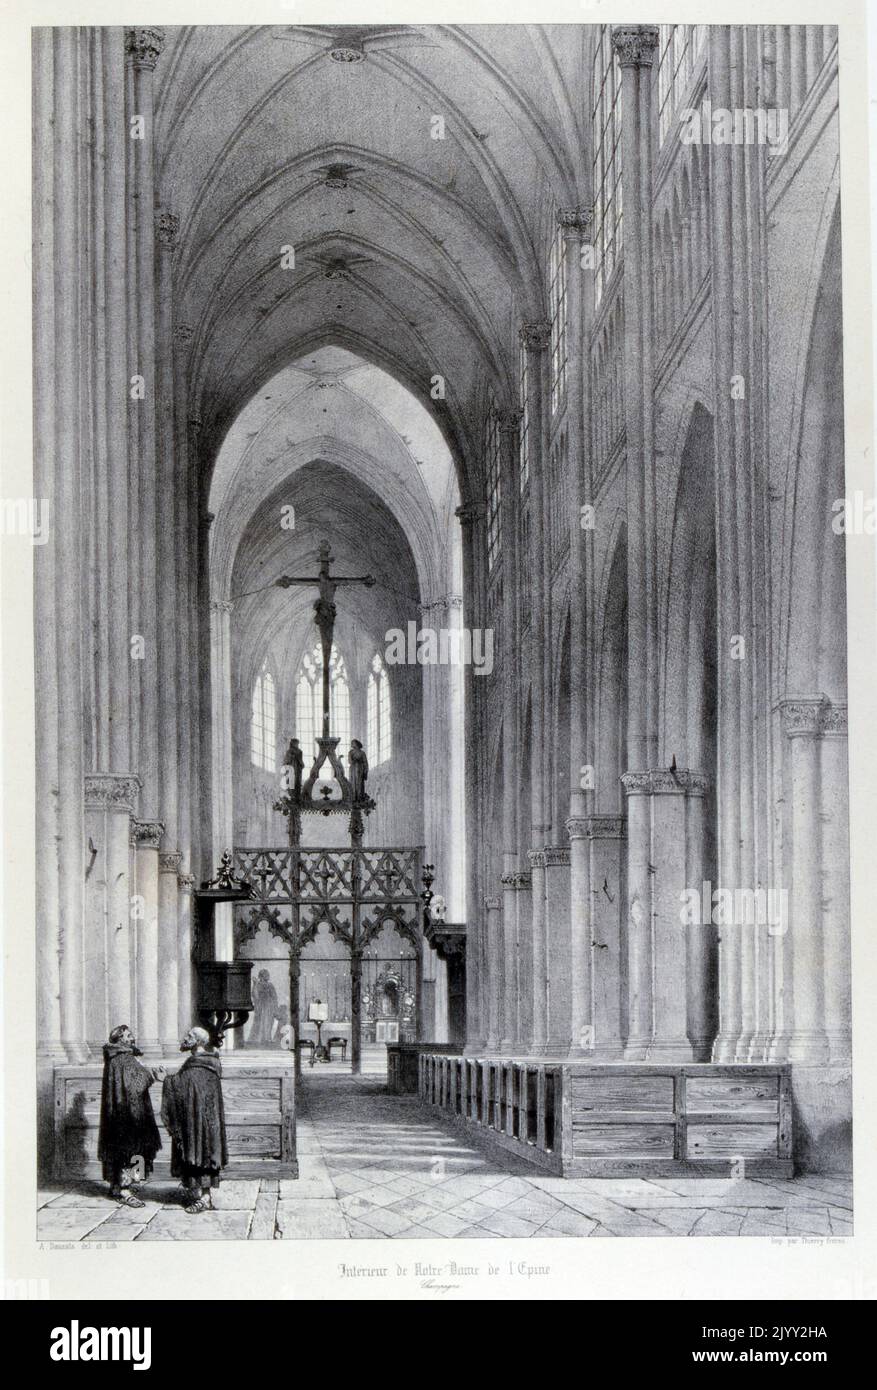 The Basilique Notre-Dame de l'Epine, near Chalons-en-Champagne by Isidore Justin Severin Taylor, baron Taylor 1789-1879, Artist and philanthropist. From 'Voyages Pittoresques' 1857. The Basilique Notre-Dame de l'Epine is a Roman Catholic basilica in the small village of L'Epine, Marne, near Chalons-en-Champagne and Verdun. It is a major masterpiece in the Flamboyant Gothic style Stock Photo